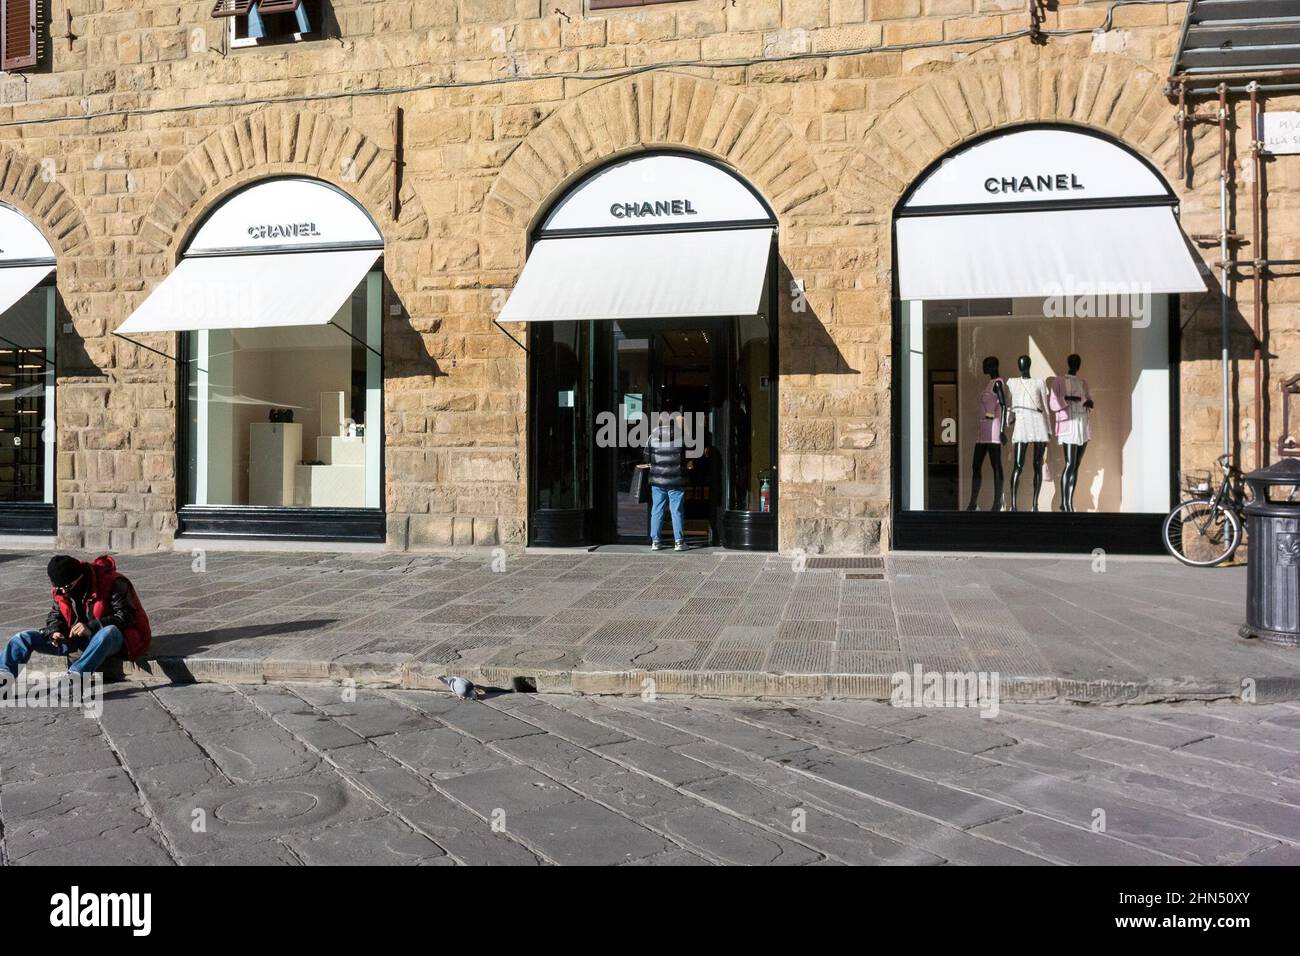 Florence, Italy, Chanel Fashion Designer Store, Front, Window Display,  Street Scene, Shops Stock Photo - Alamy